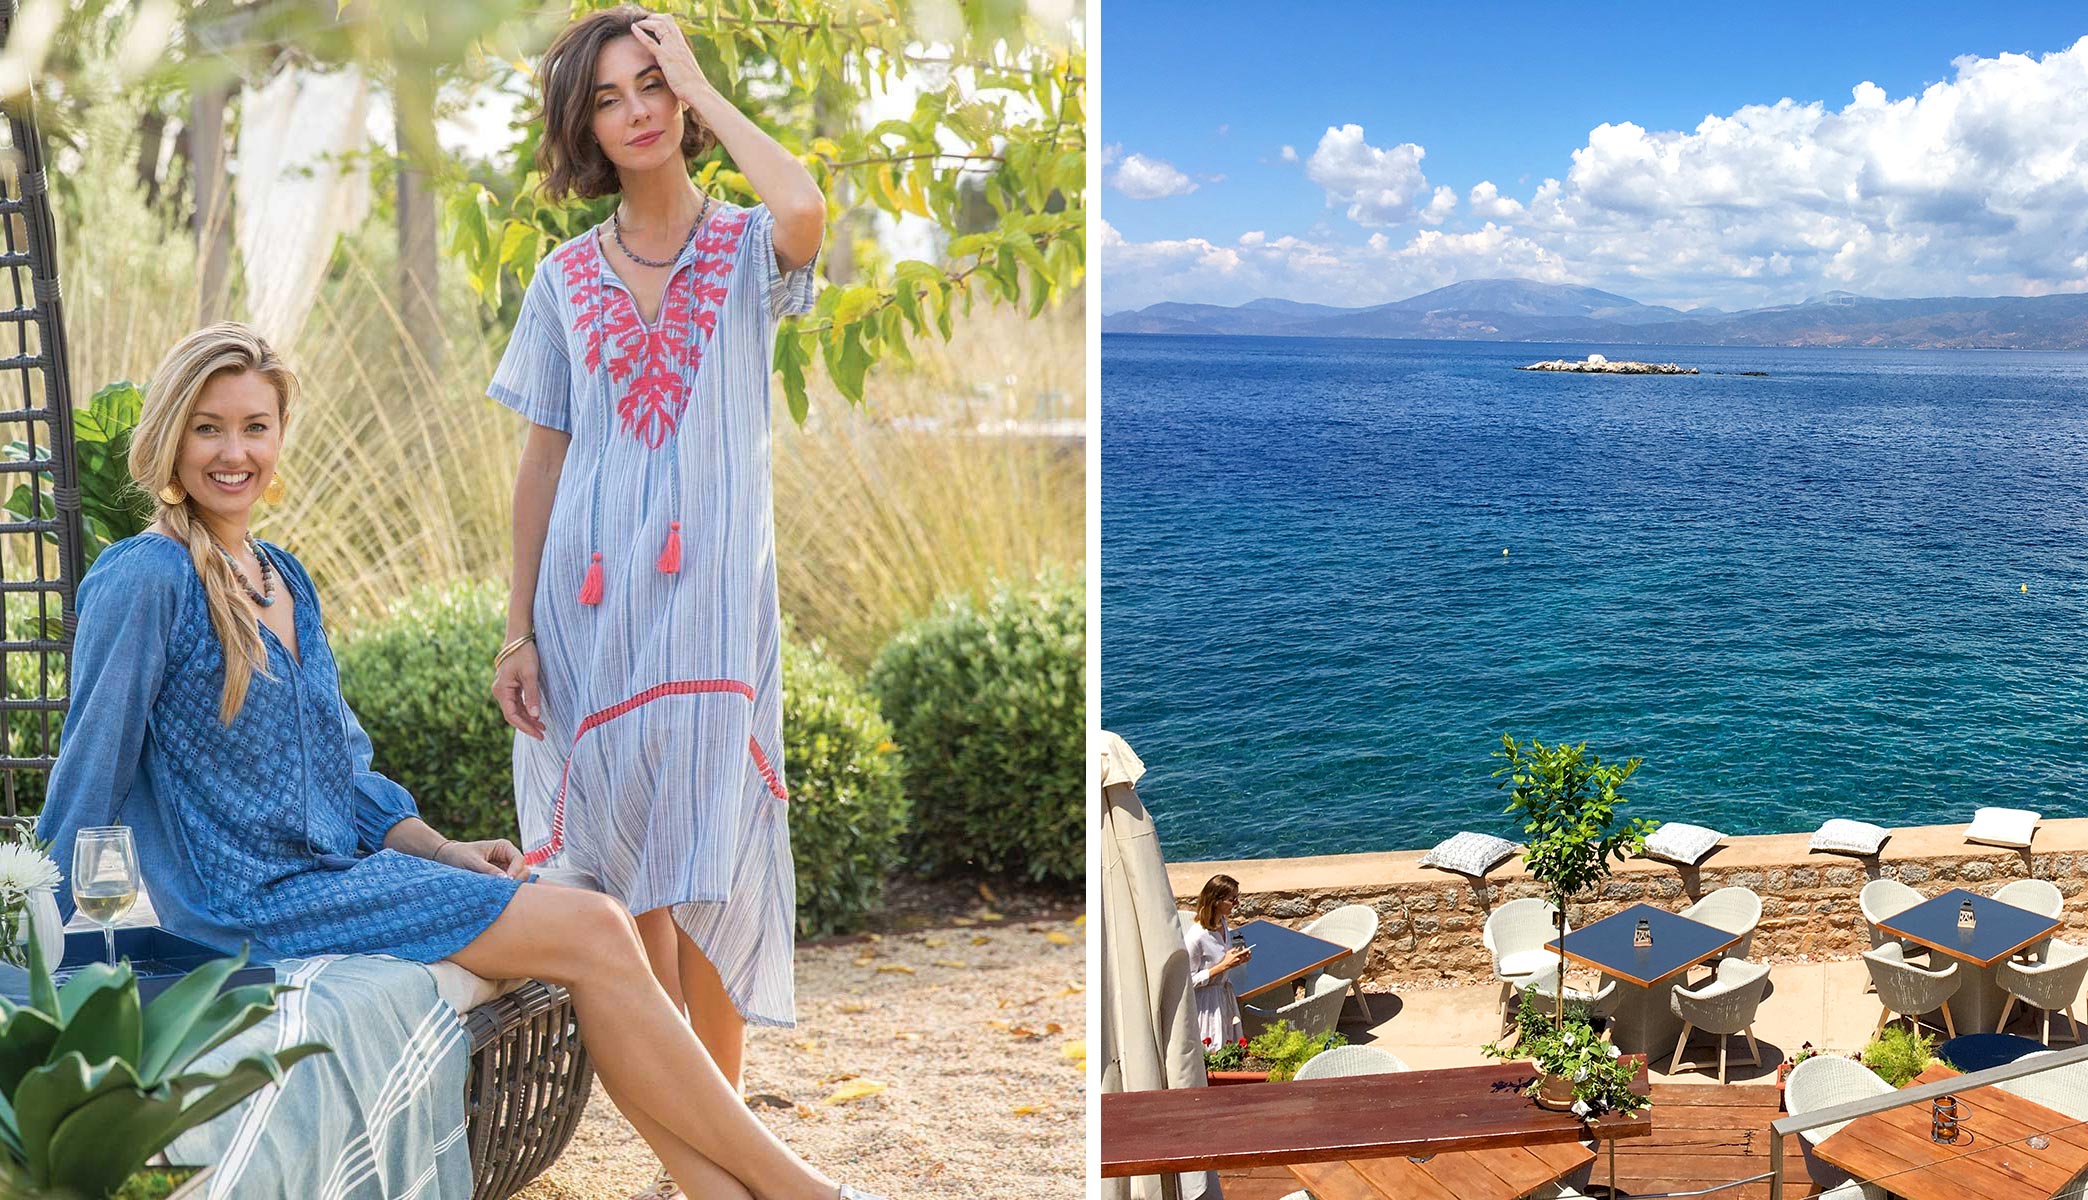 Beautiful blue and white beach dresses inspired by Hydra, Greece